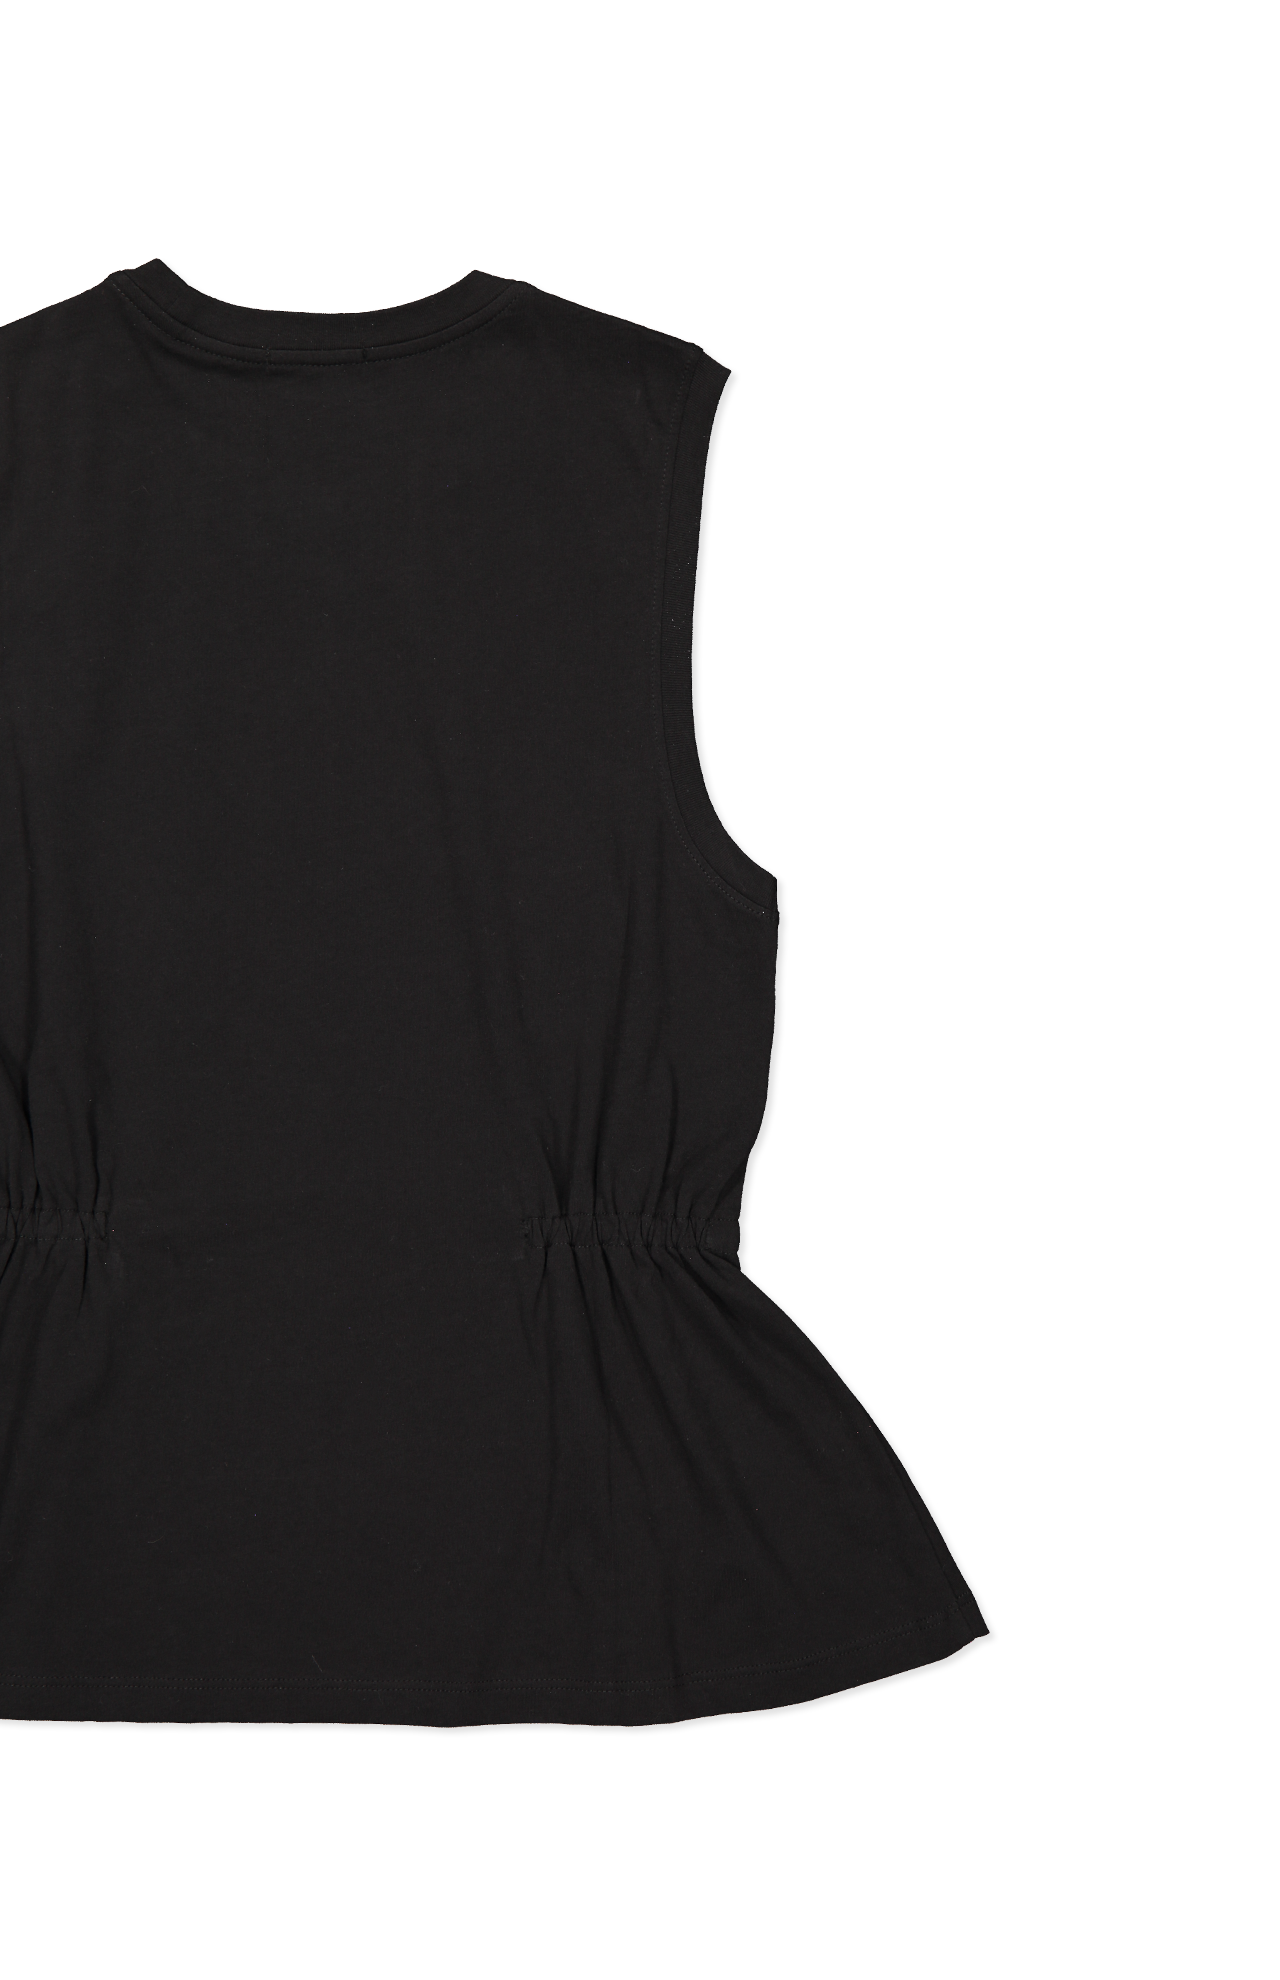 ATM Classic Jersey Sleeveless Cinched Waist Top Black Back Flat Image (6990469562483)